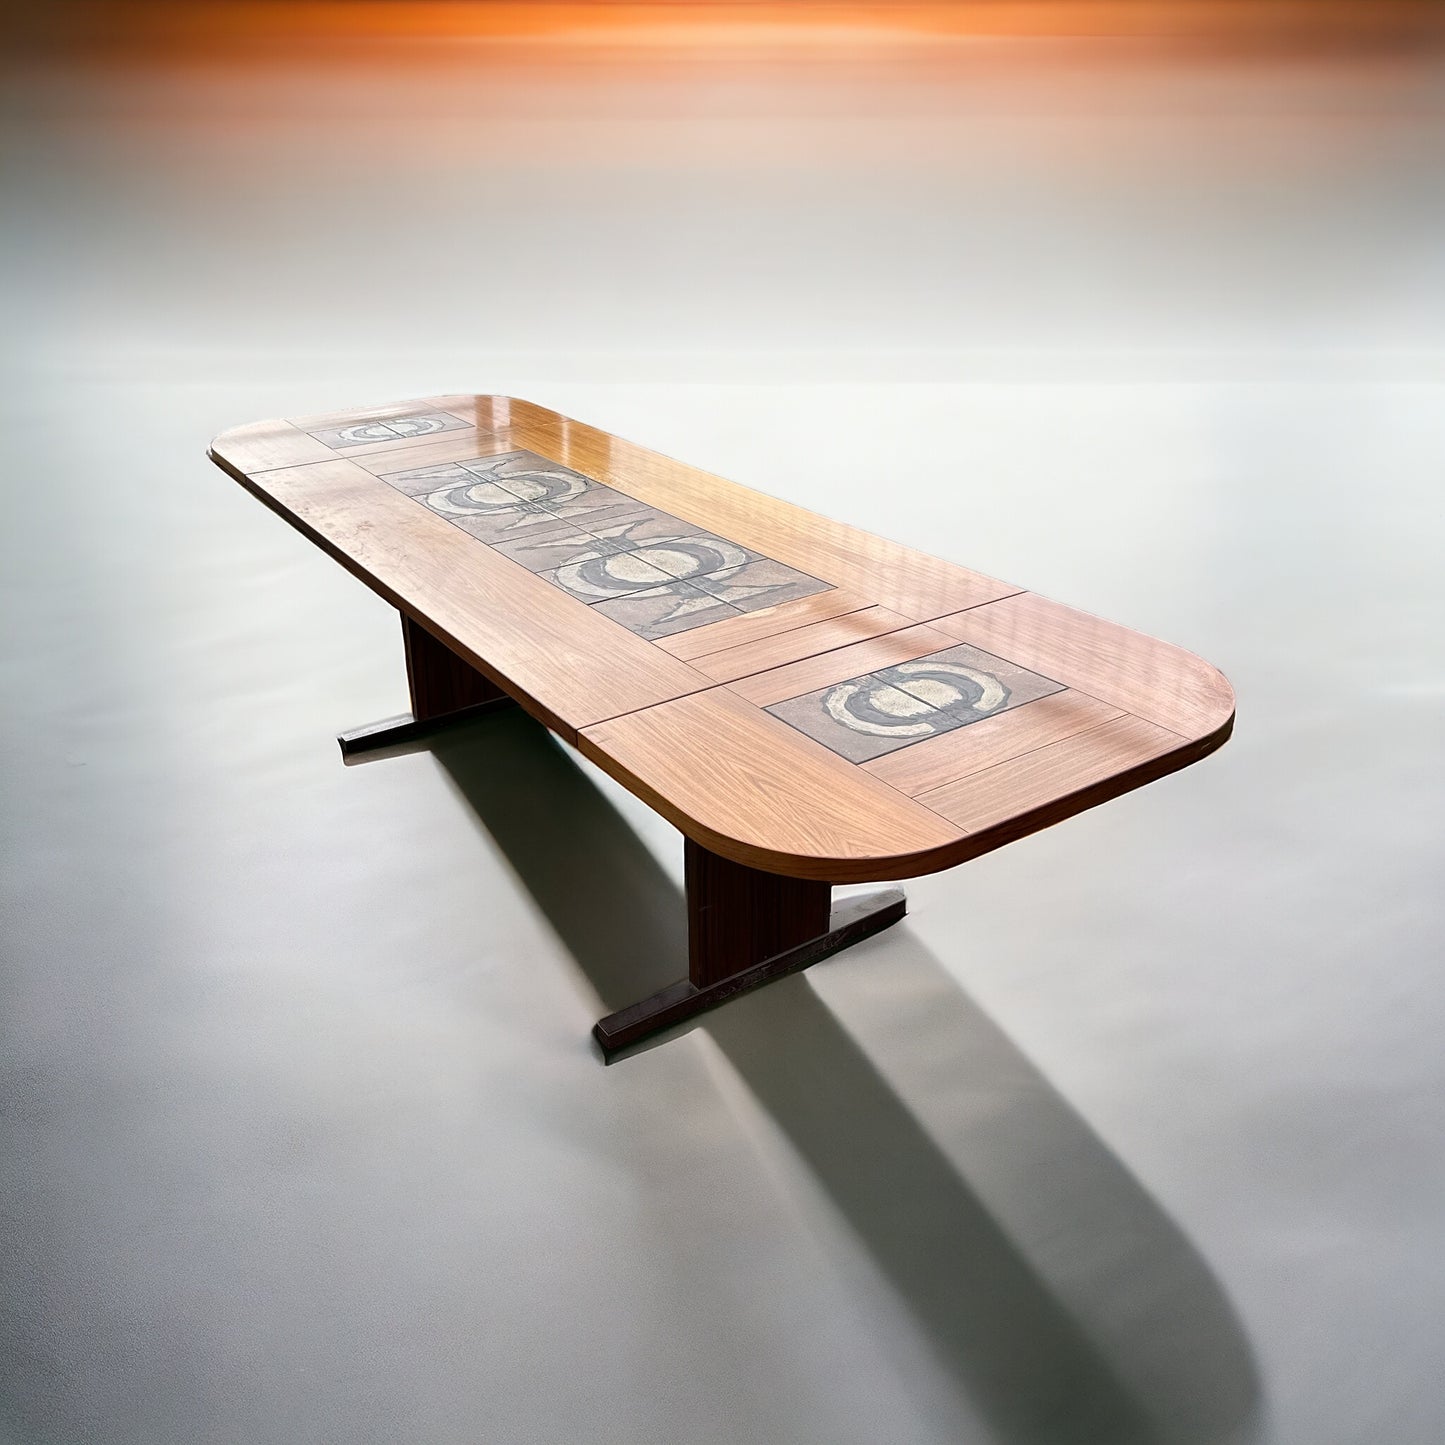 Large Dropleaf Dining Table with Tile Inset by Gangso Moble 1970s Poul Hermann Poulsen Design